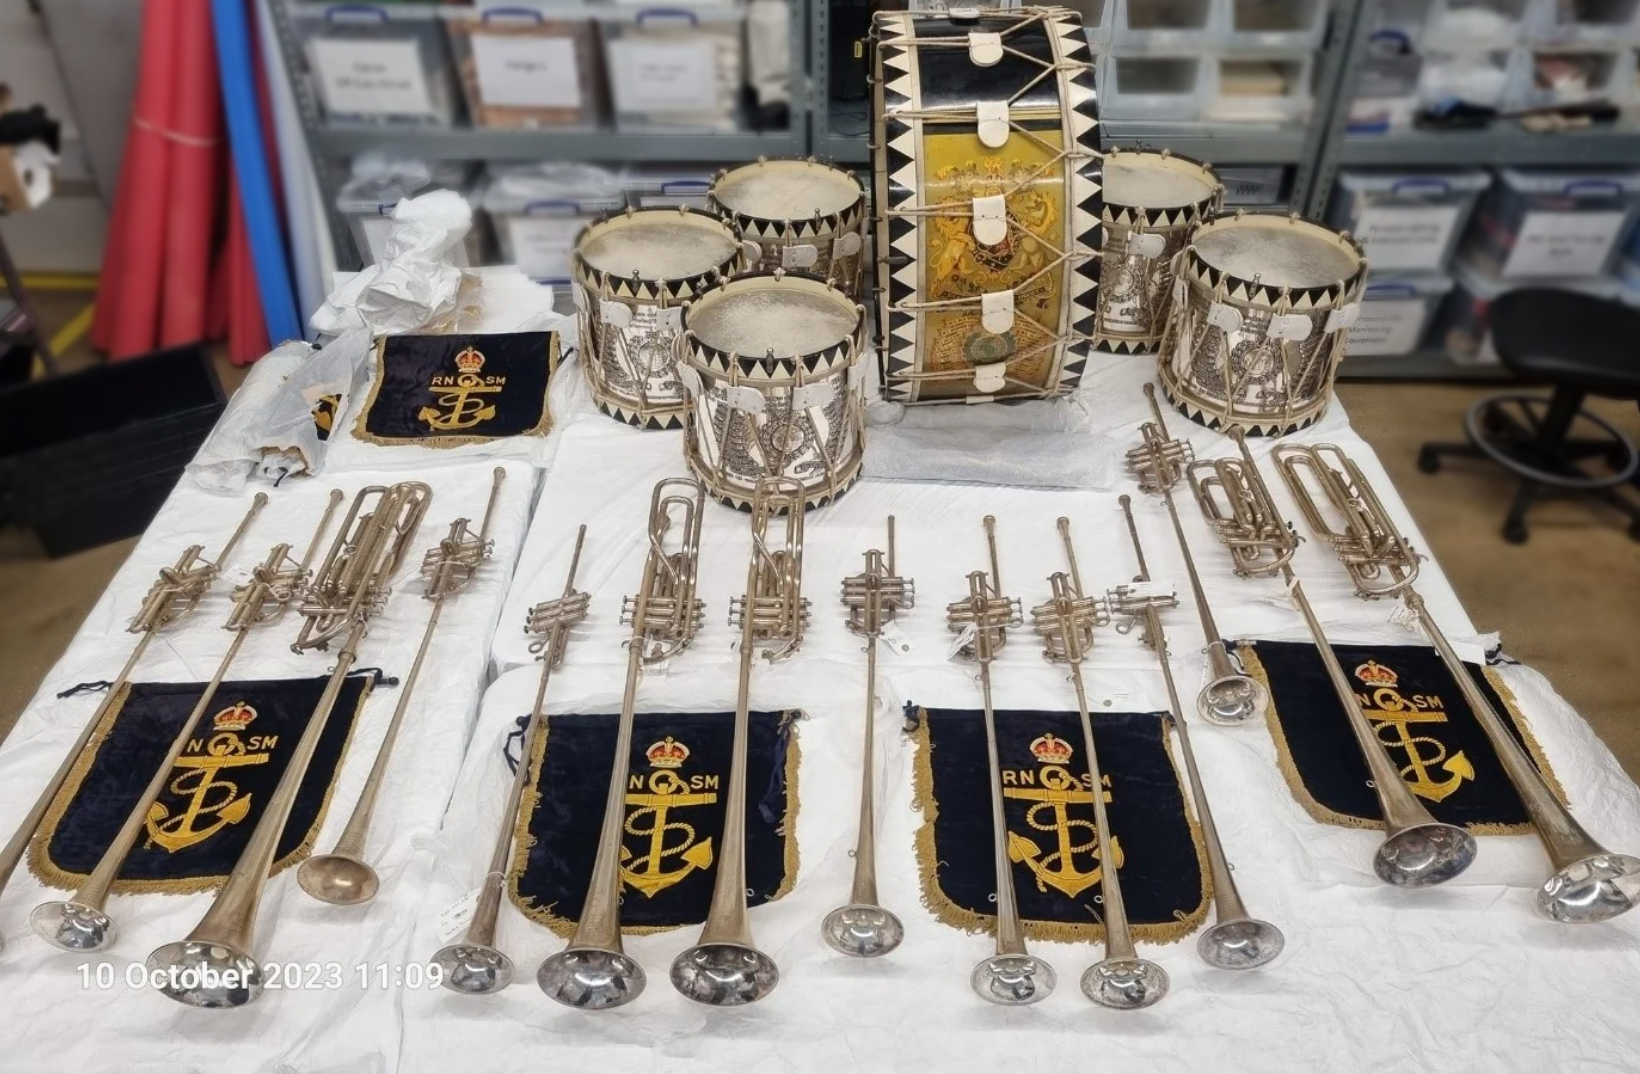 A beautifully made set of brass instruments of the Royal Marines Band Service.